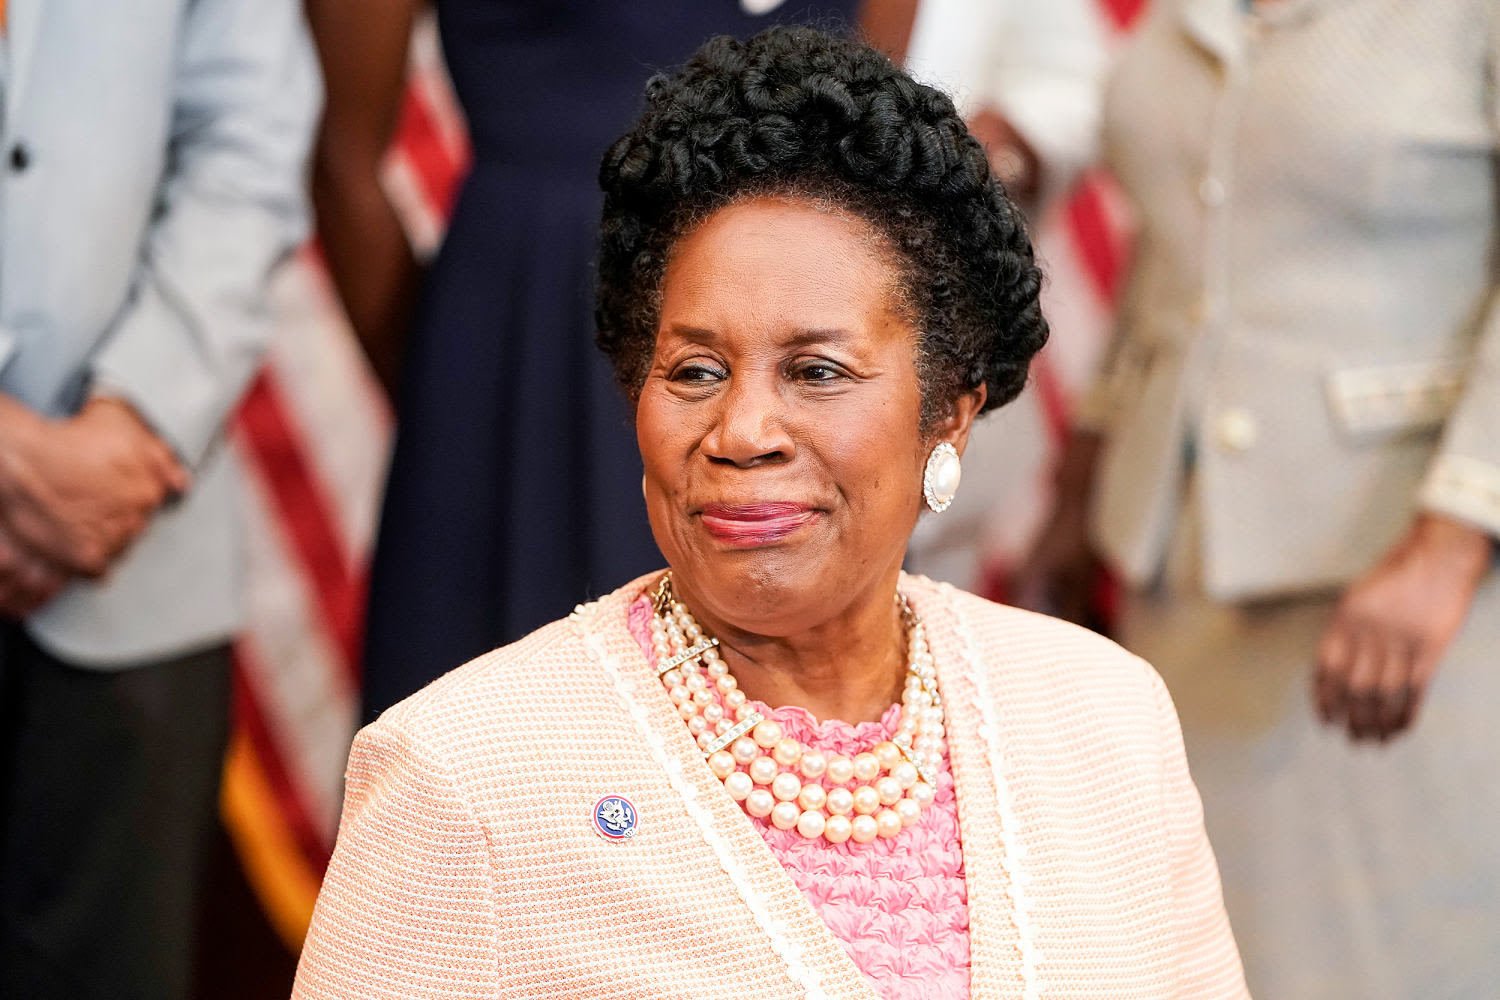 Rep. Sheila Jackson Lee dies after battle with pancreatic cancer